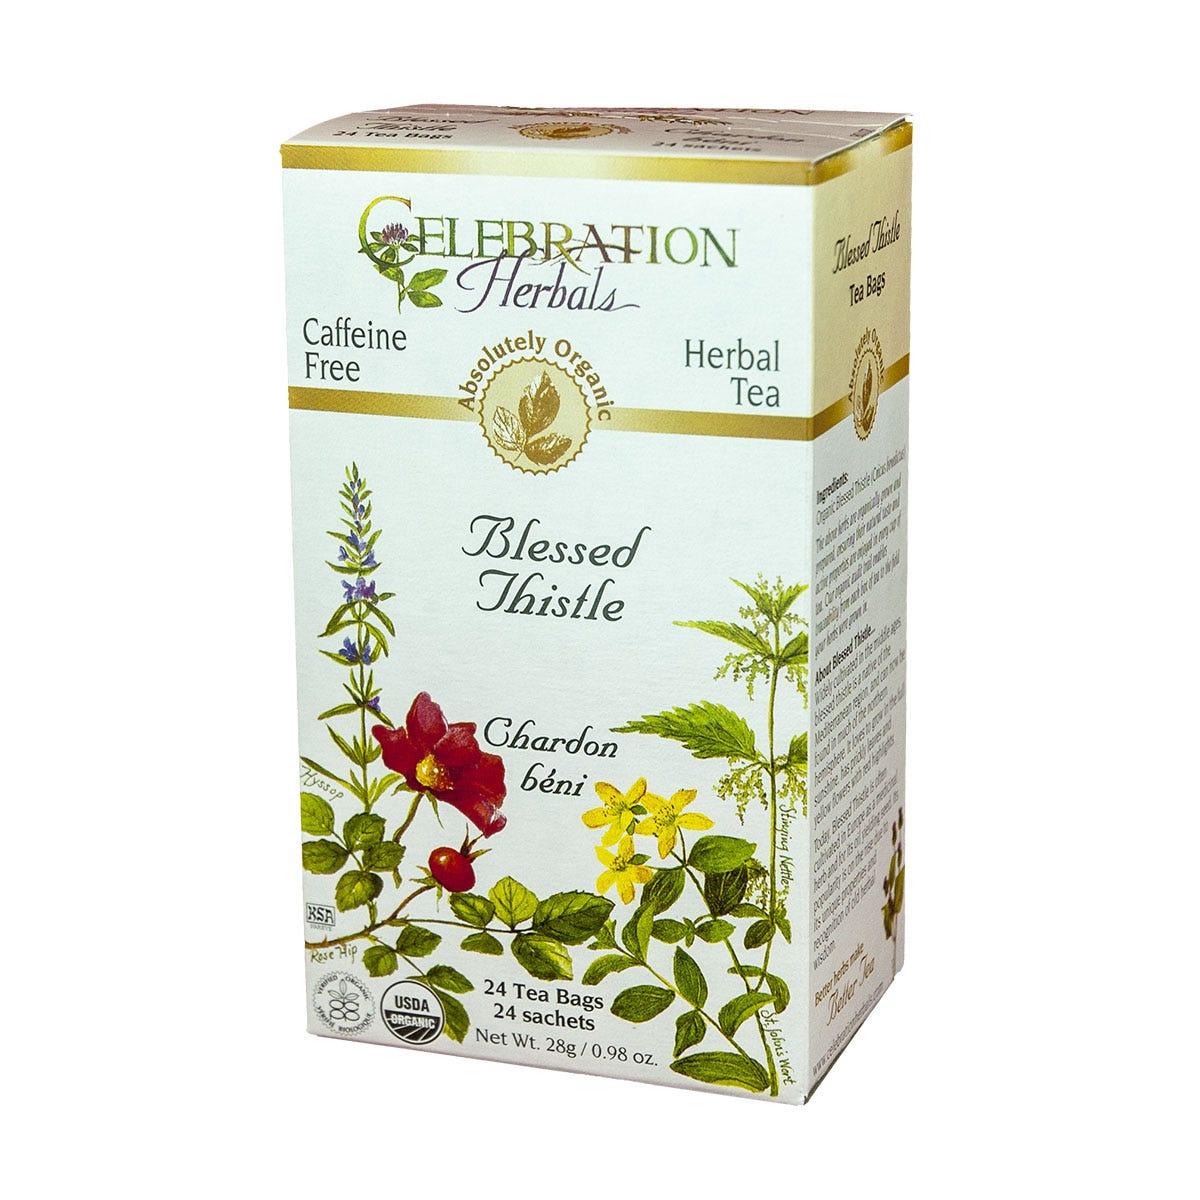 Celebration Herbals Organic Blessed Thistle Tea 24 bags